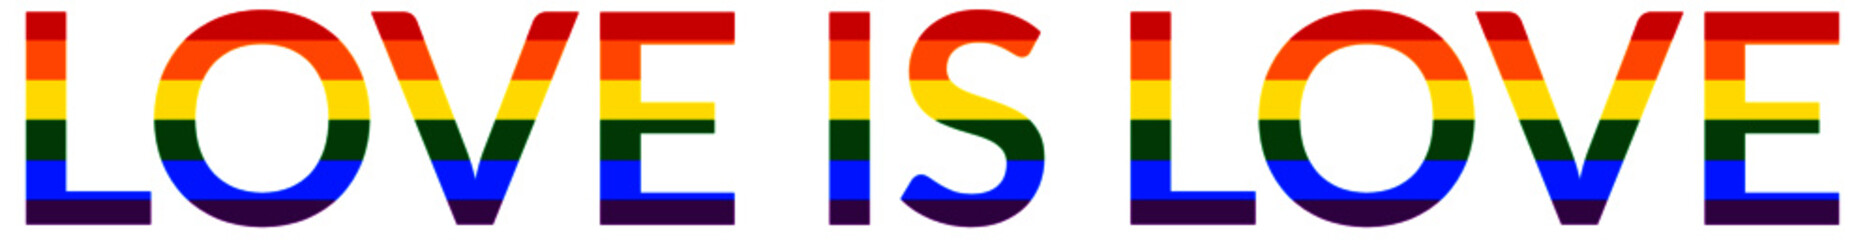 Love is love lettering, rainbow graphic banner, lgbt  transgender support